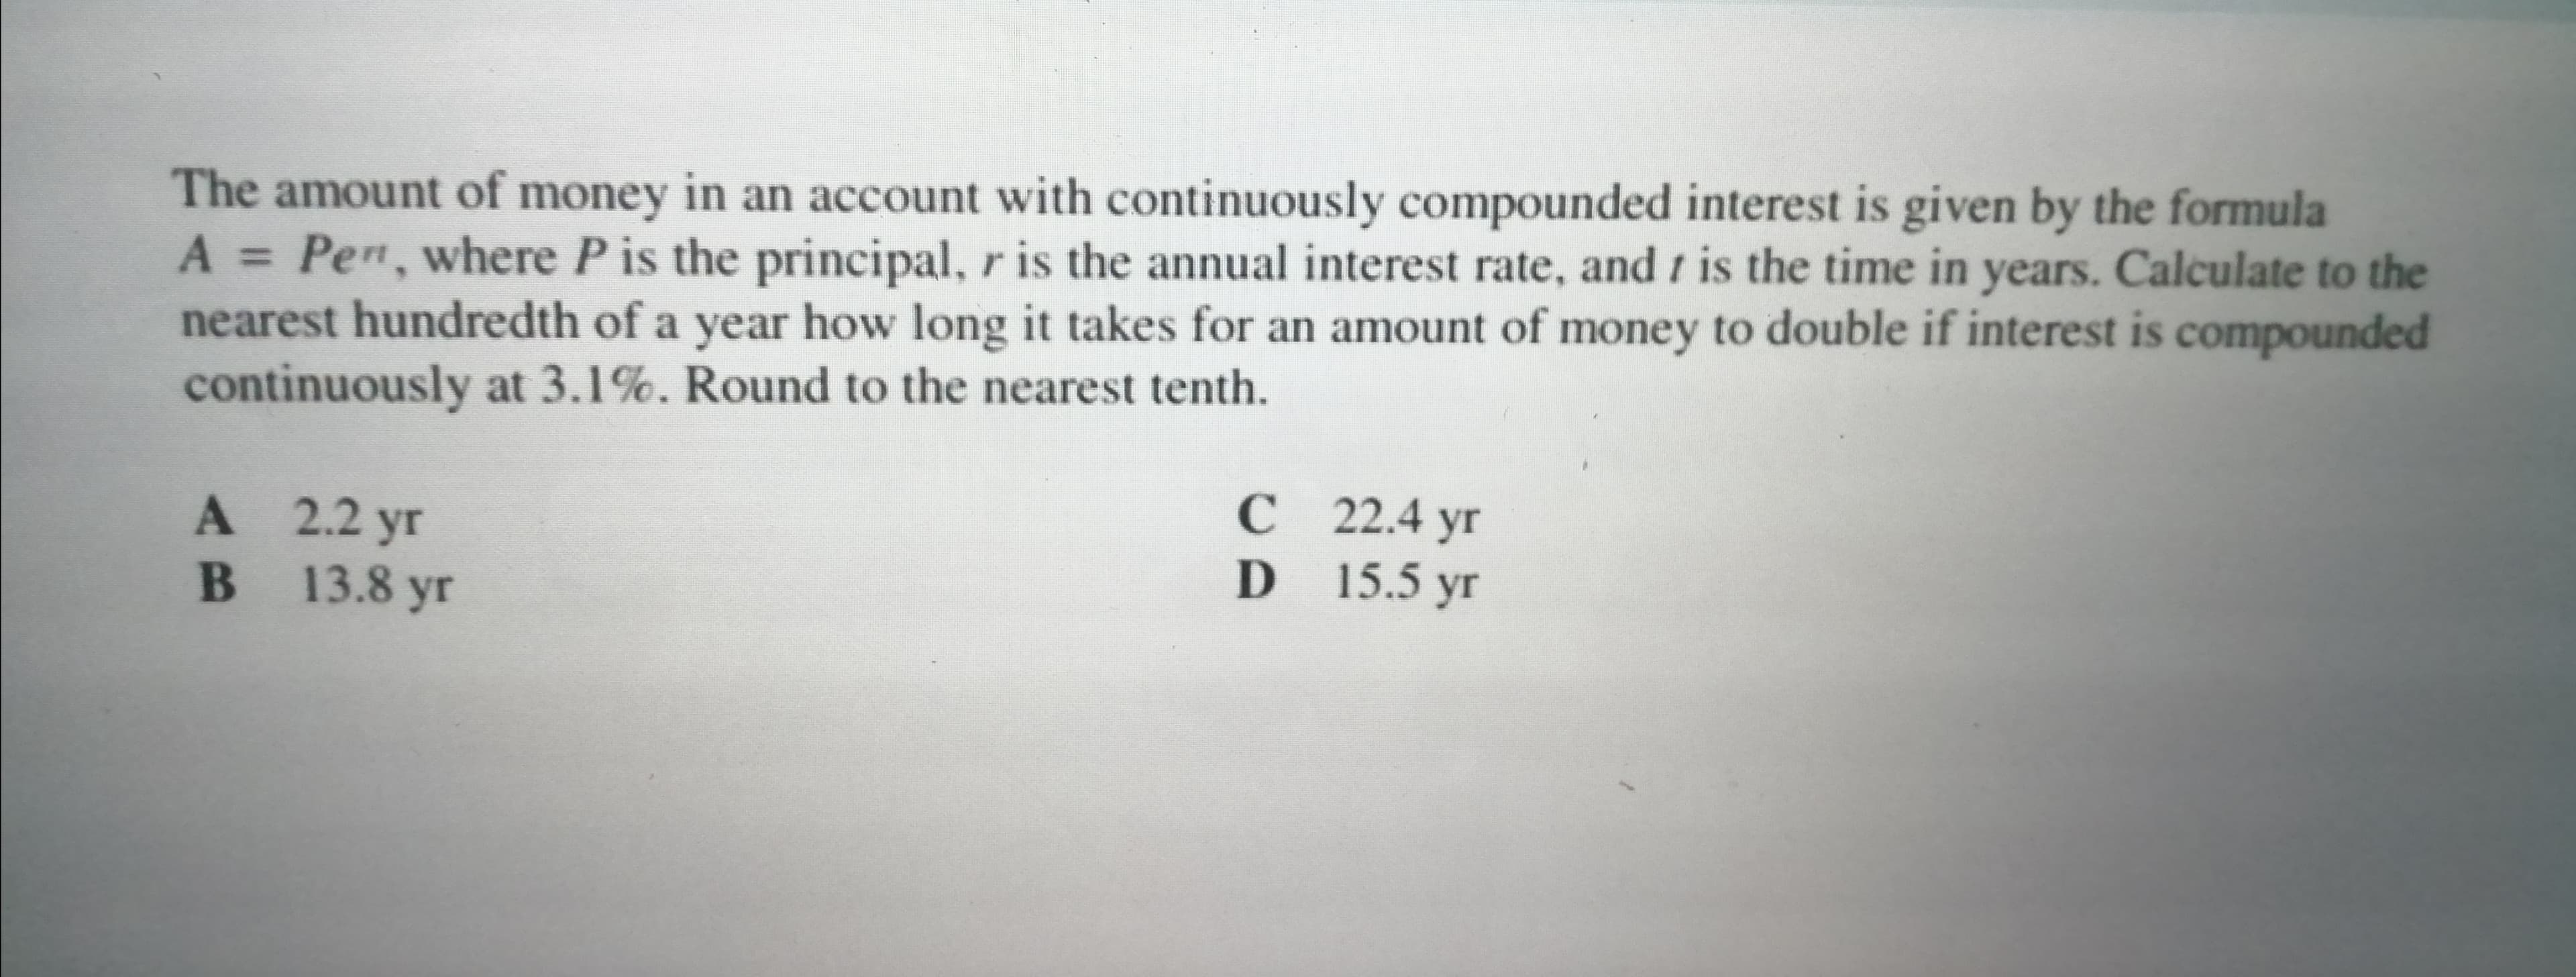 The amount of money in an account with continuously compounded interest is given by the formula
A Pen, where P is the principal, r is the annual interest rate, and t is the time in years. Calculate to the
nearest hundredth of a year how long it takes for an amount of money to double if interest is compounded
continuously at 3.1%. Round to the nearest tenth.
%3D
А 2.2 yг
В 13.8 уг
С 22.4 yr
D 15.5 yr
